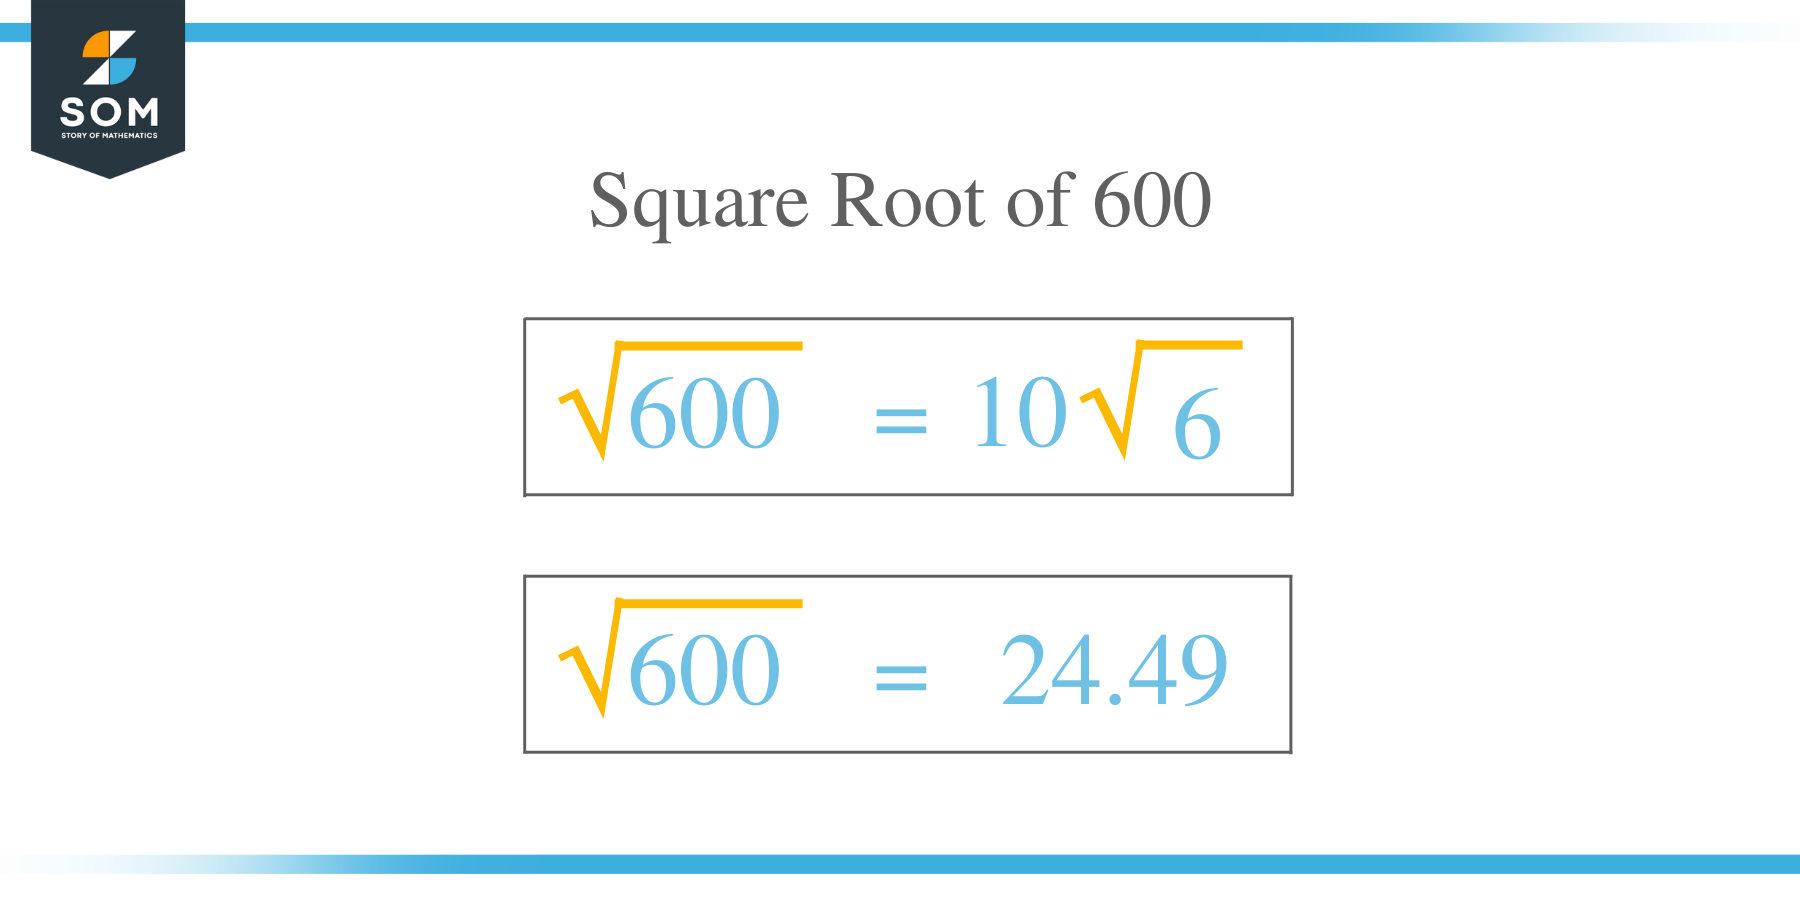 Square Root of 600